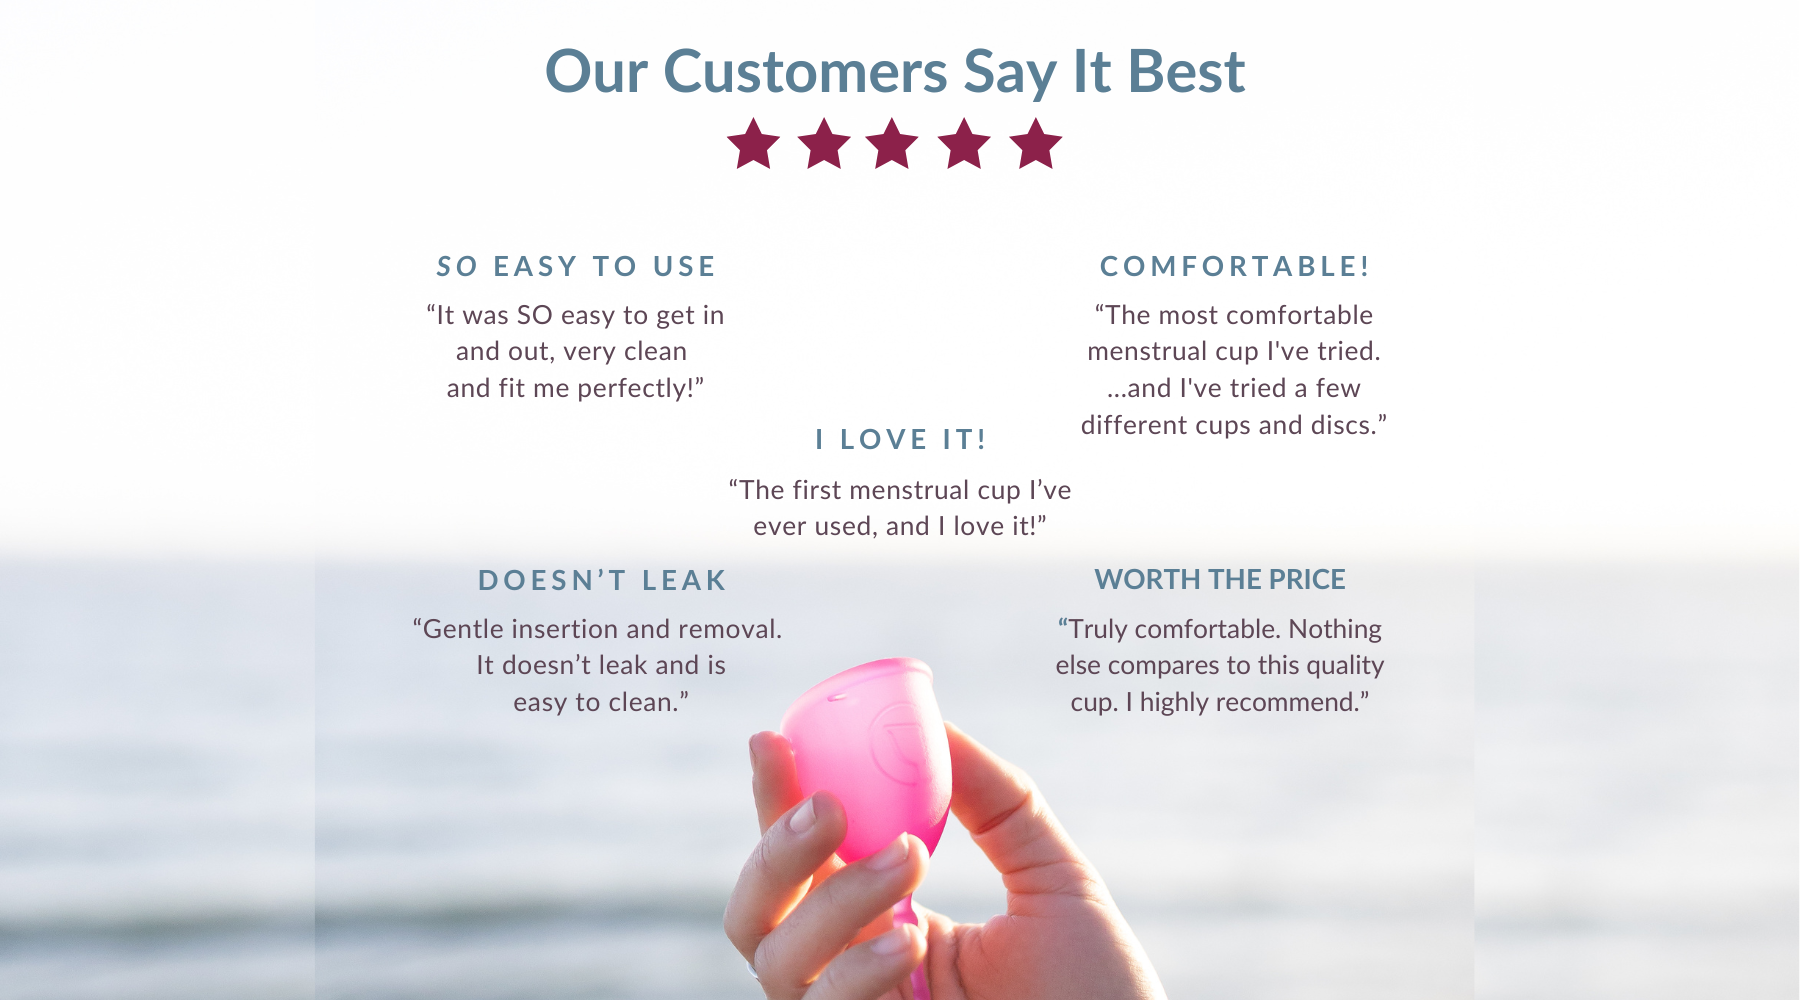 Our Customers Say It Best: “Gentle insertion and removal.  It doesn’t leak and is easy to clean.” Doesn’t leak “The most comfortable menstrual cup I've tried. ...and I've tried a few different cups and discs.” comfortable! “The first menstrual cup I’ve ever used, and I love it!” i love it! “It was SO easy to get in and out, very clean  and fit me perfectly!” So easy to use “Truly comfortable. Nothing else compares to this quality  cup. I highly recommend.” Worth the price  